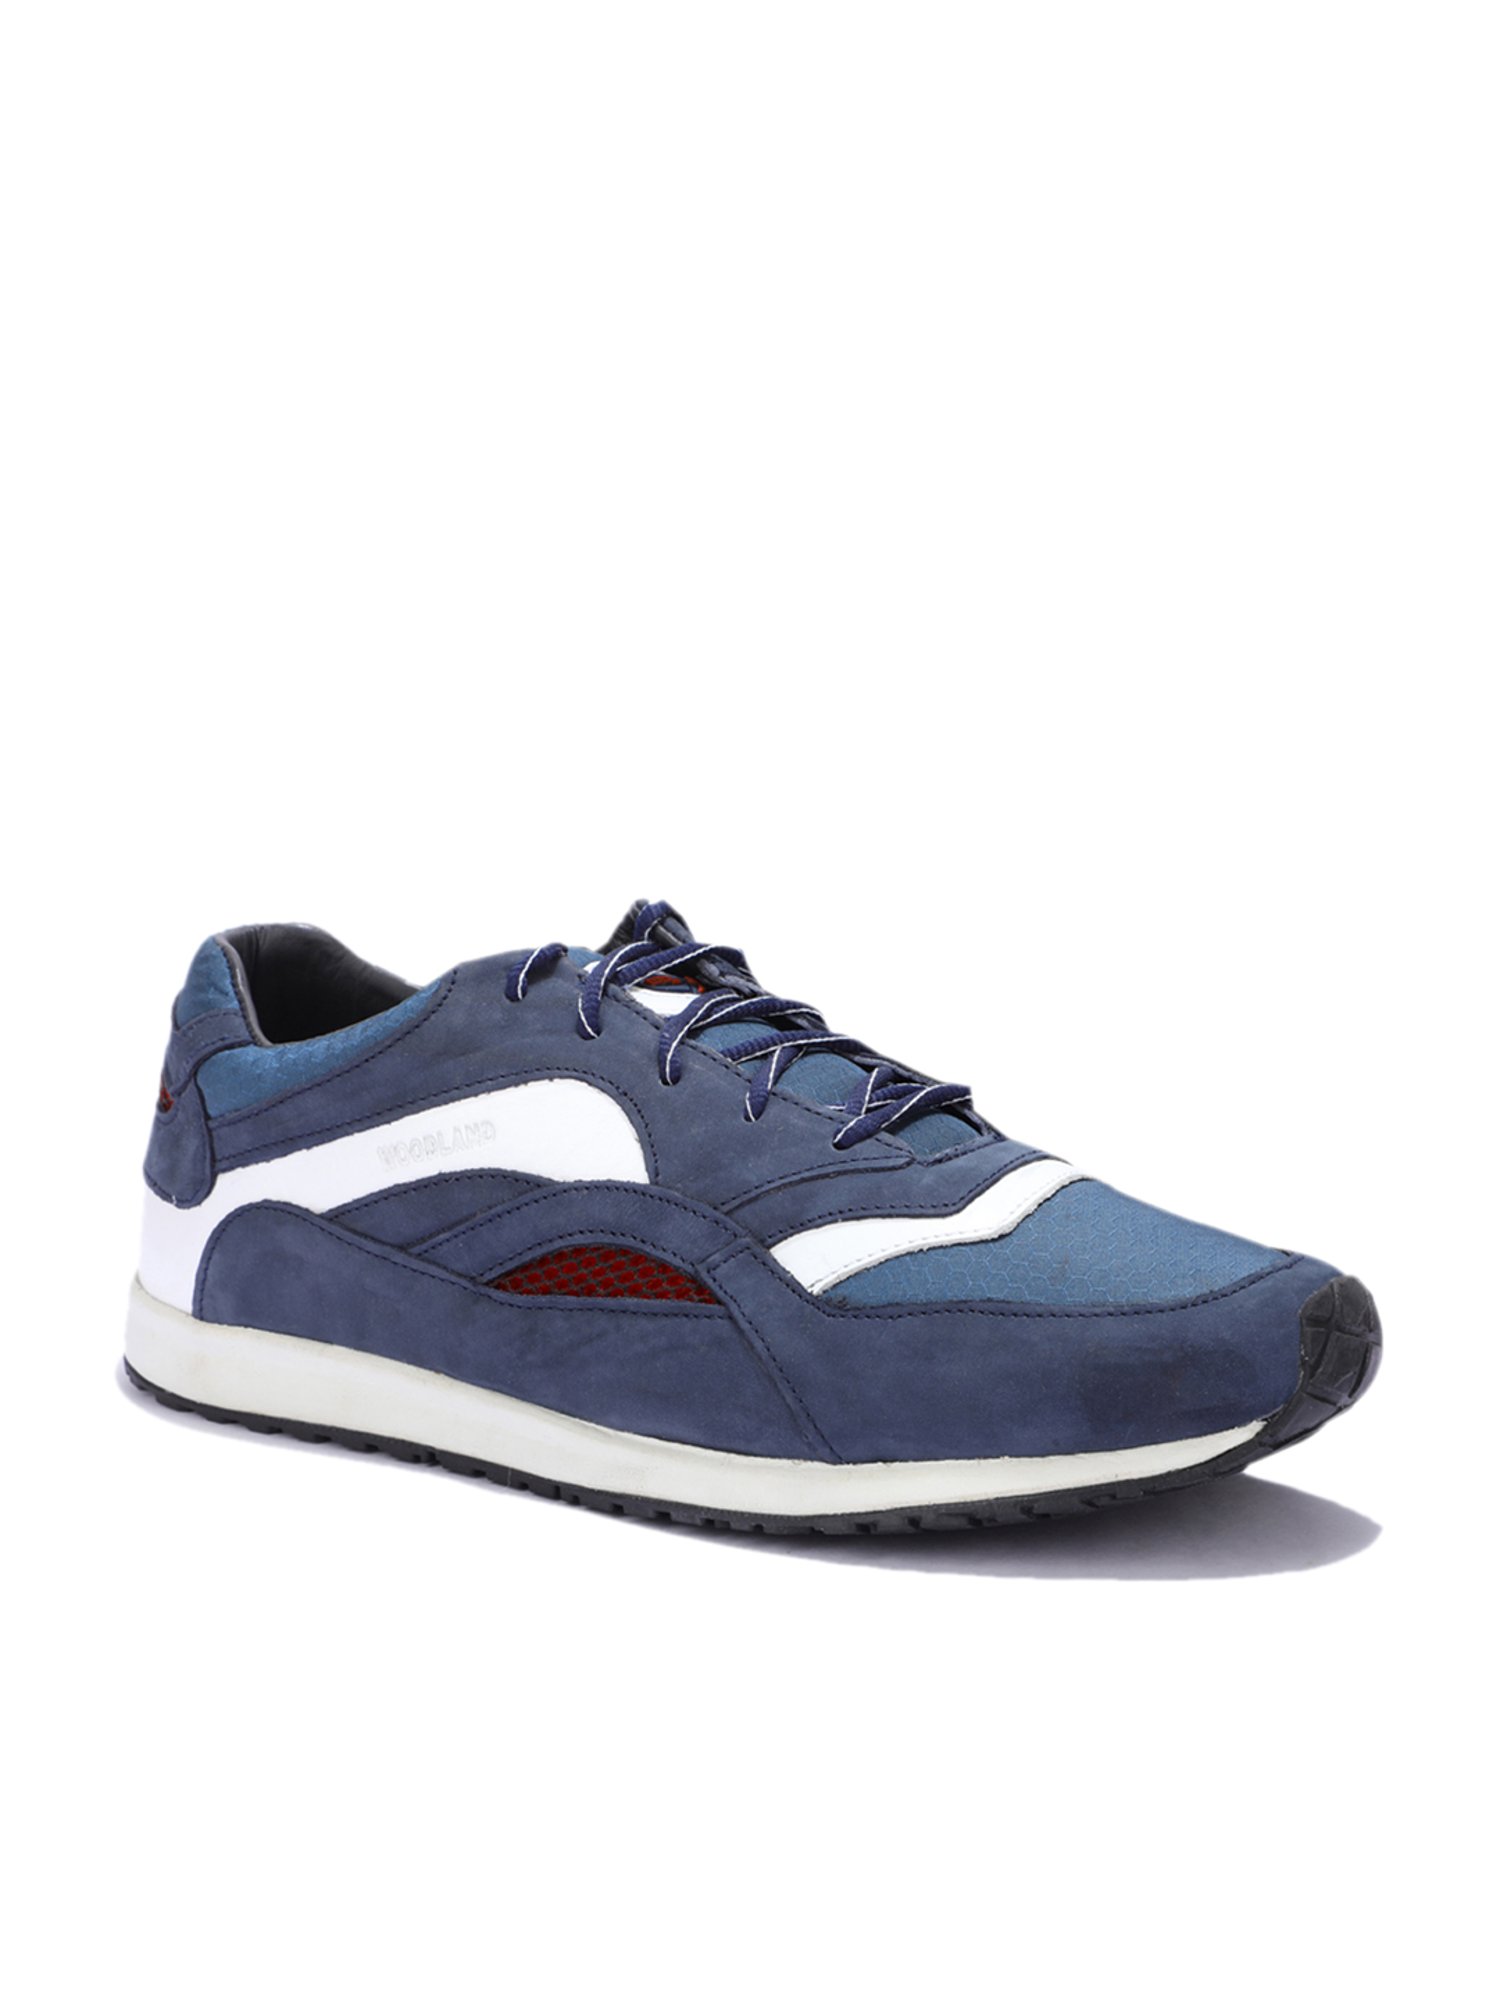 Buy Woodland Navy Casual Sneakers for 